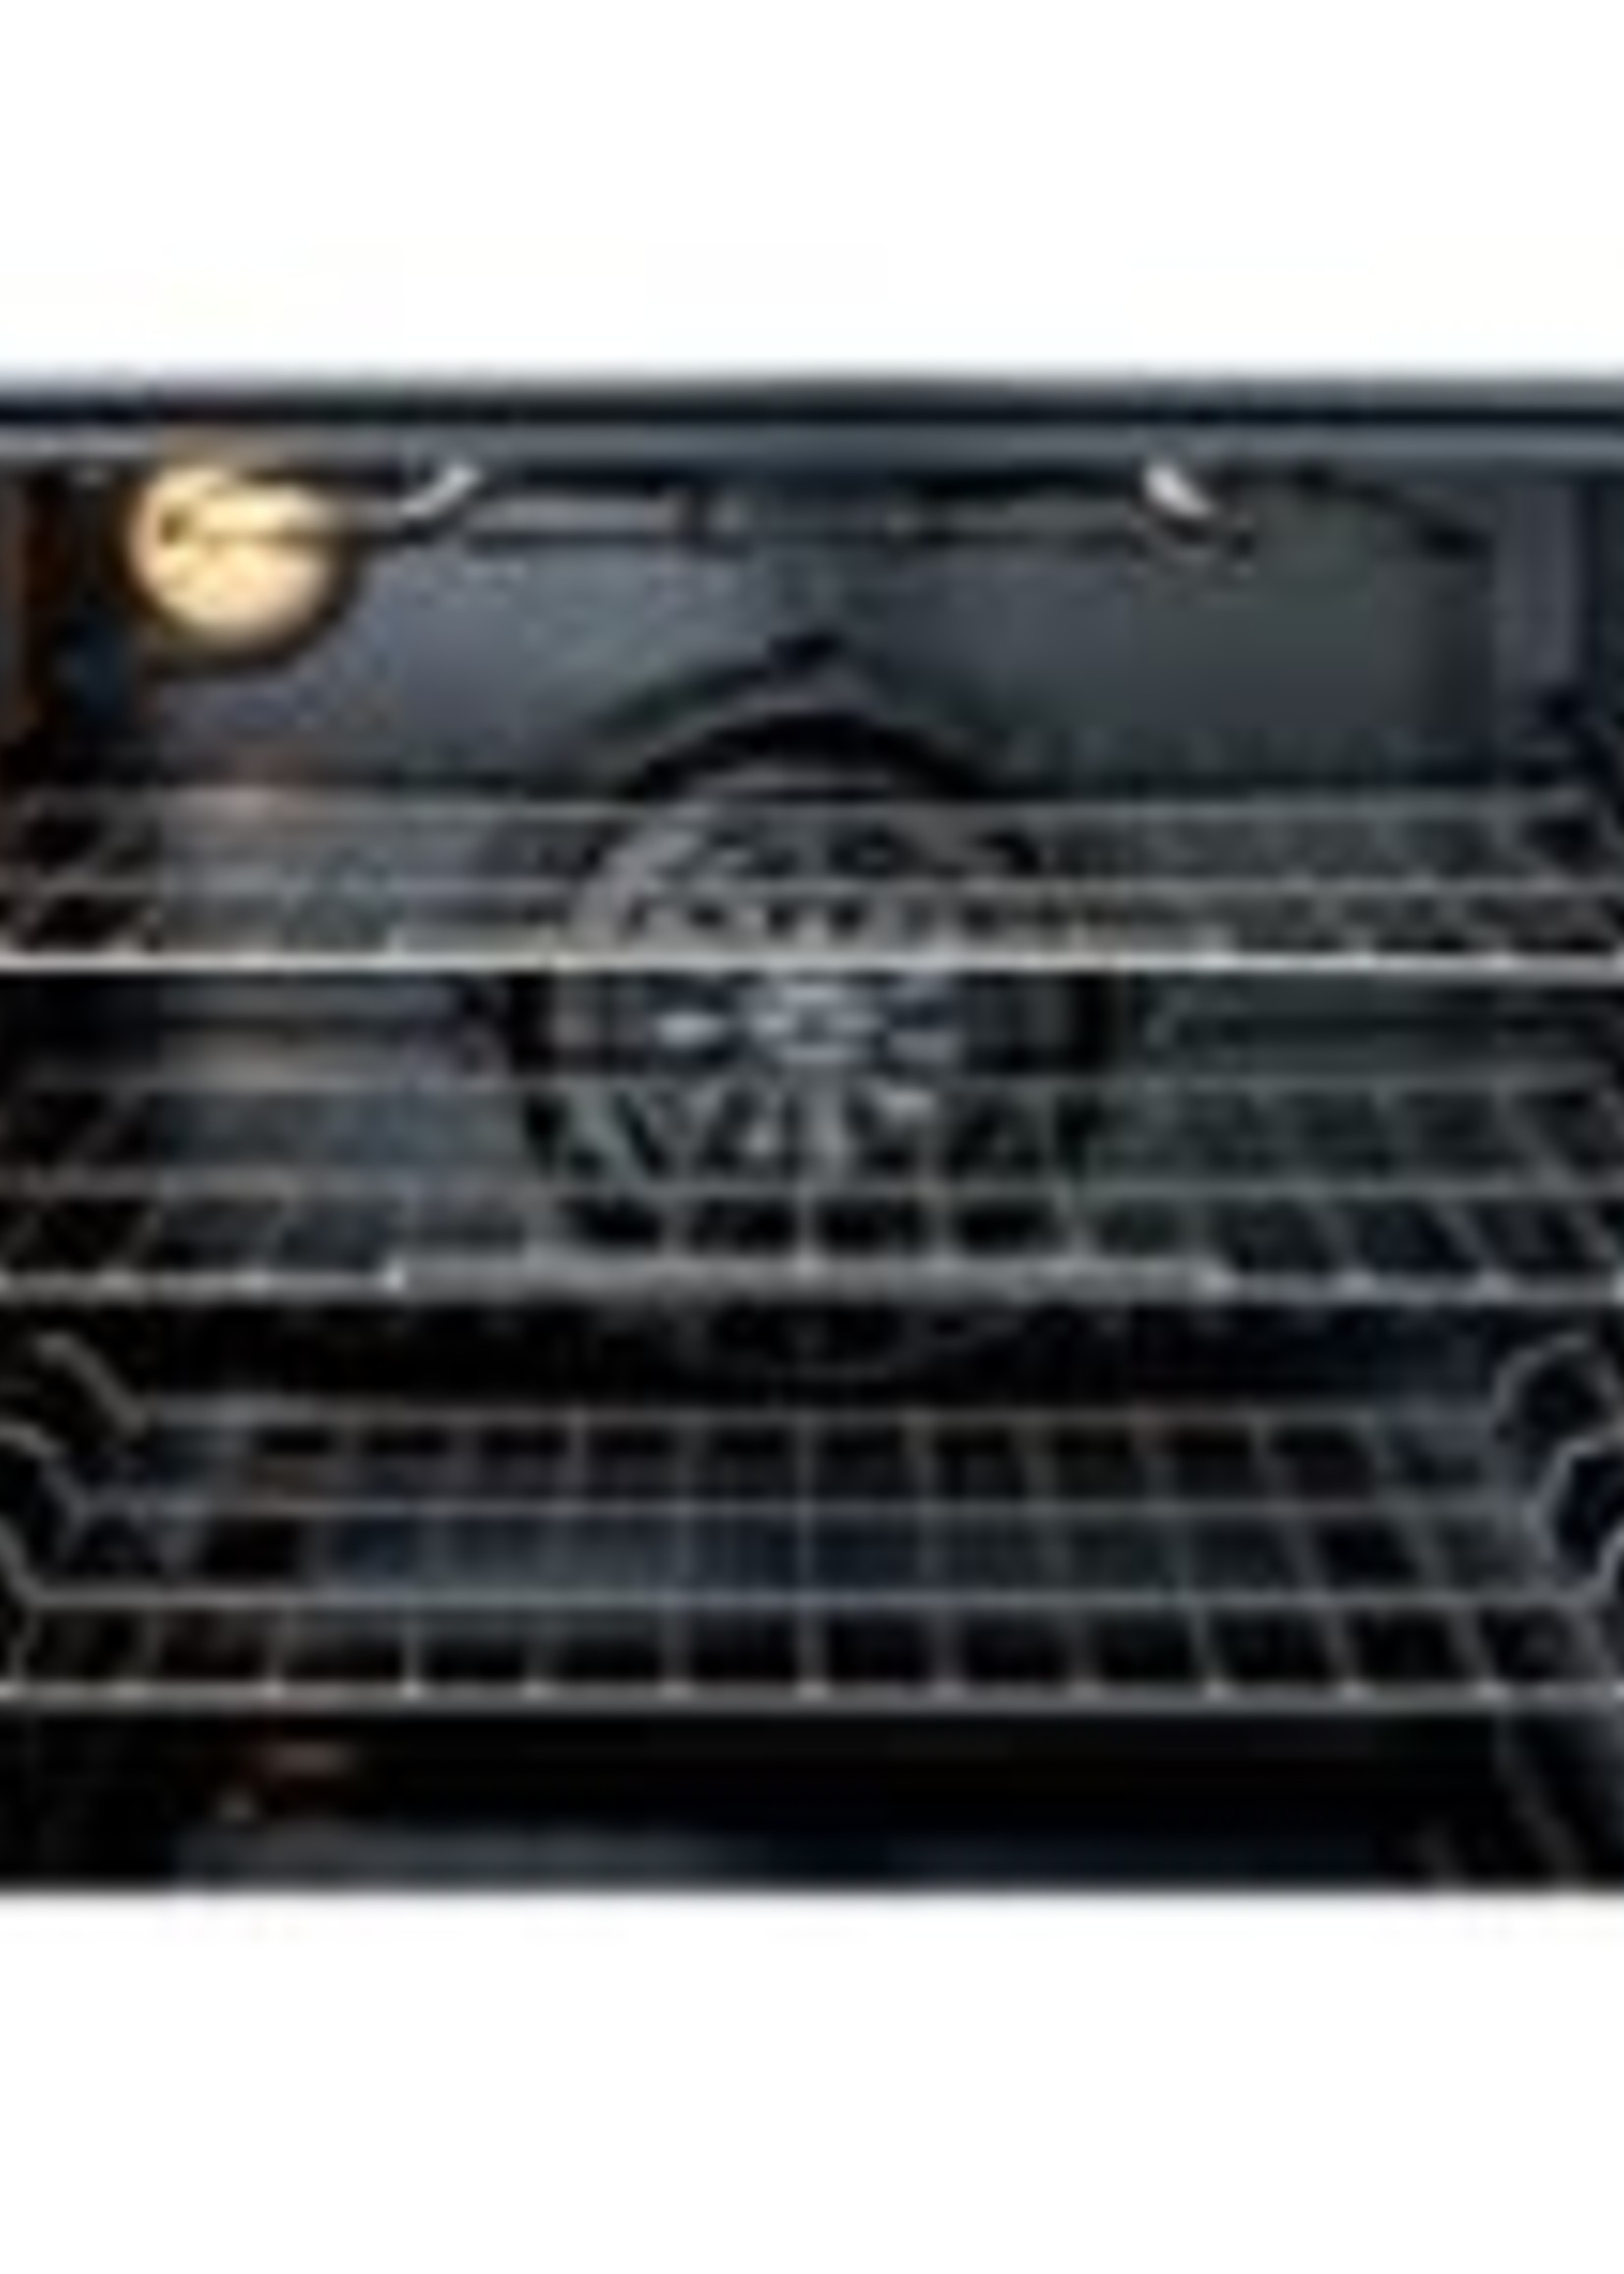 Frigidaire **Frigidaire GCRE3060AF  (NIB)  5.7 cu. ft. Electric Range with True Convection Self-Cleaning Oven in Stainless Steel with Air Fry